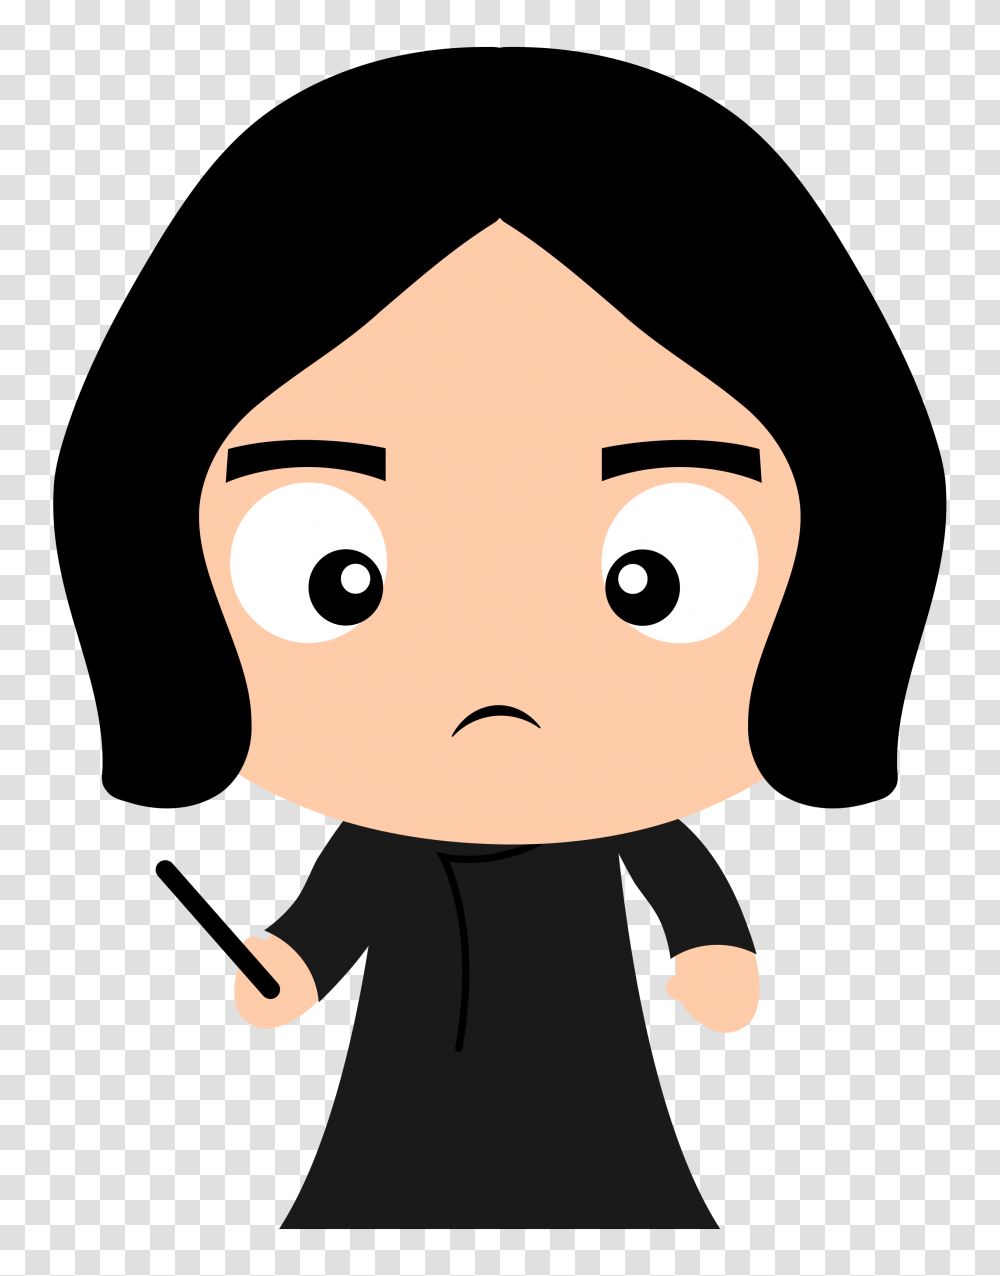 Severus Snape From Harry Potter Head Of Slytherin House, Toy, Snowman, Winter, Outdoors Transparent Png